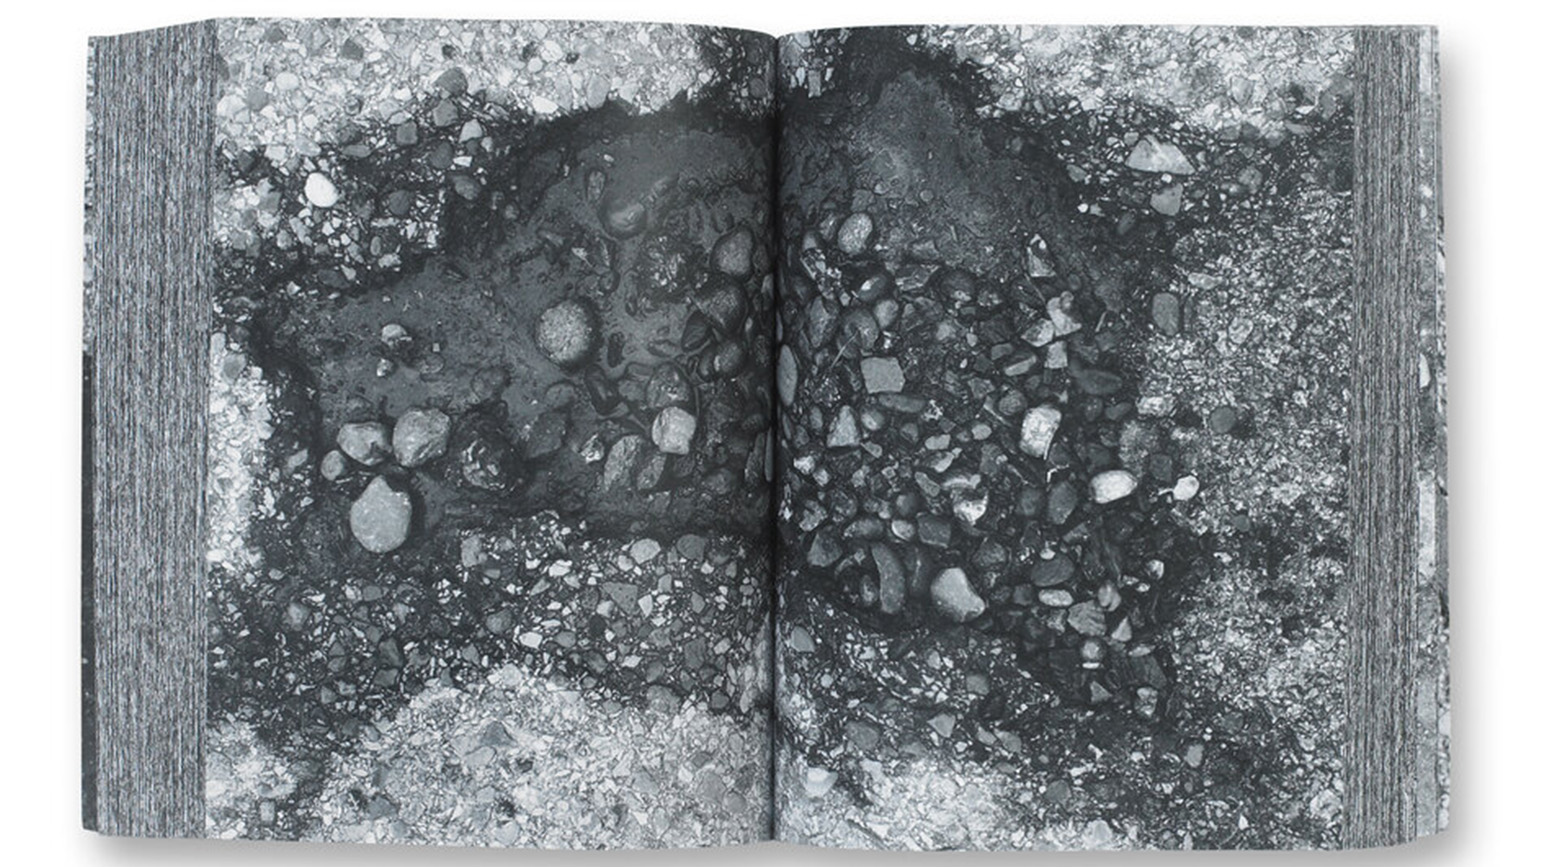 Two-page spread showing a black-and-white close-up photograph of a pothole from Kim Beck's book Pavements, Potholes & Repairs